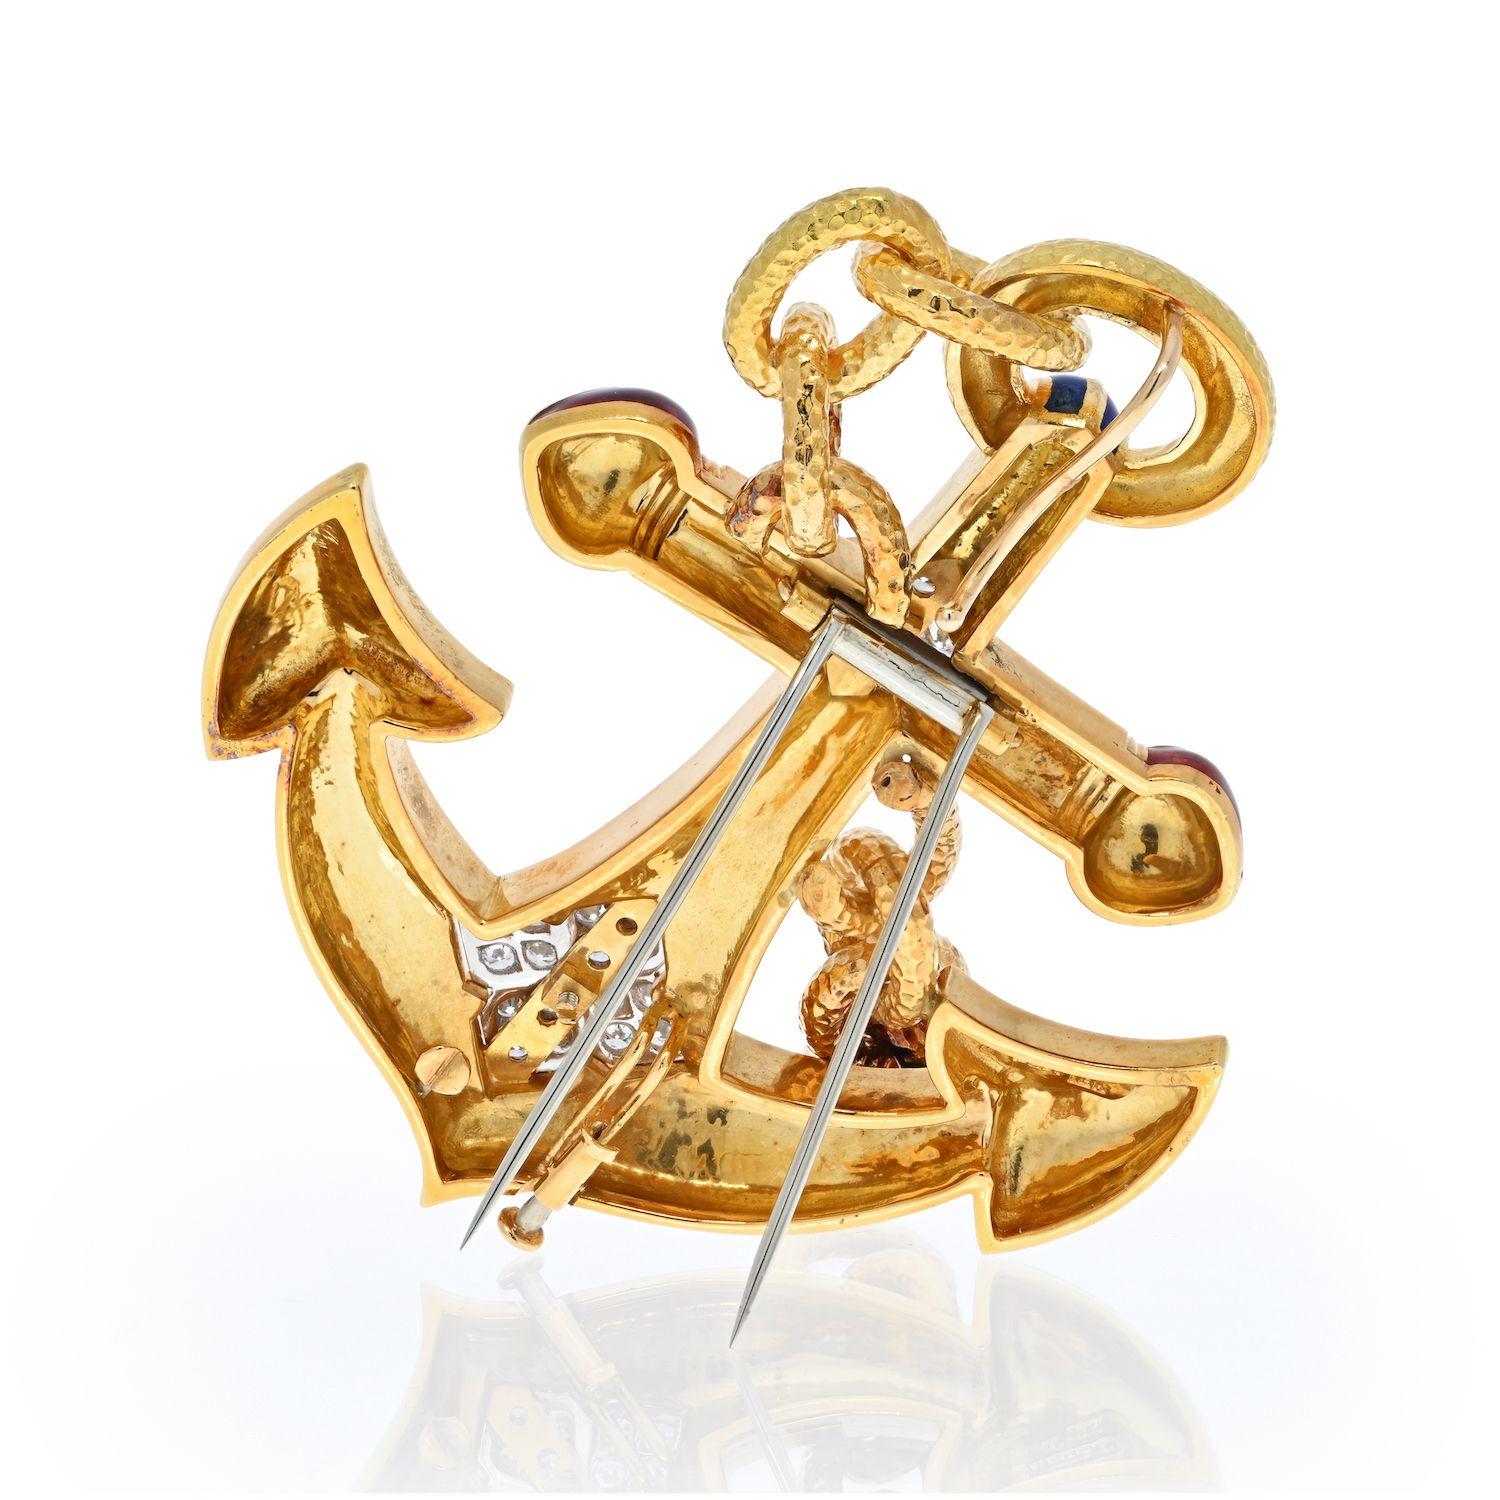 There is a very curious story about anchors in jewelry. In the early stages of Christianity, when Romans persecuted those who followed the religion, the anchor was a way that Christians could identify other Christians. They would leave anchors